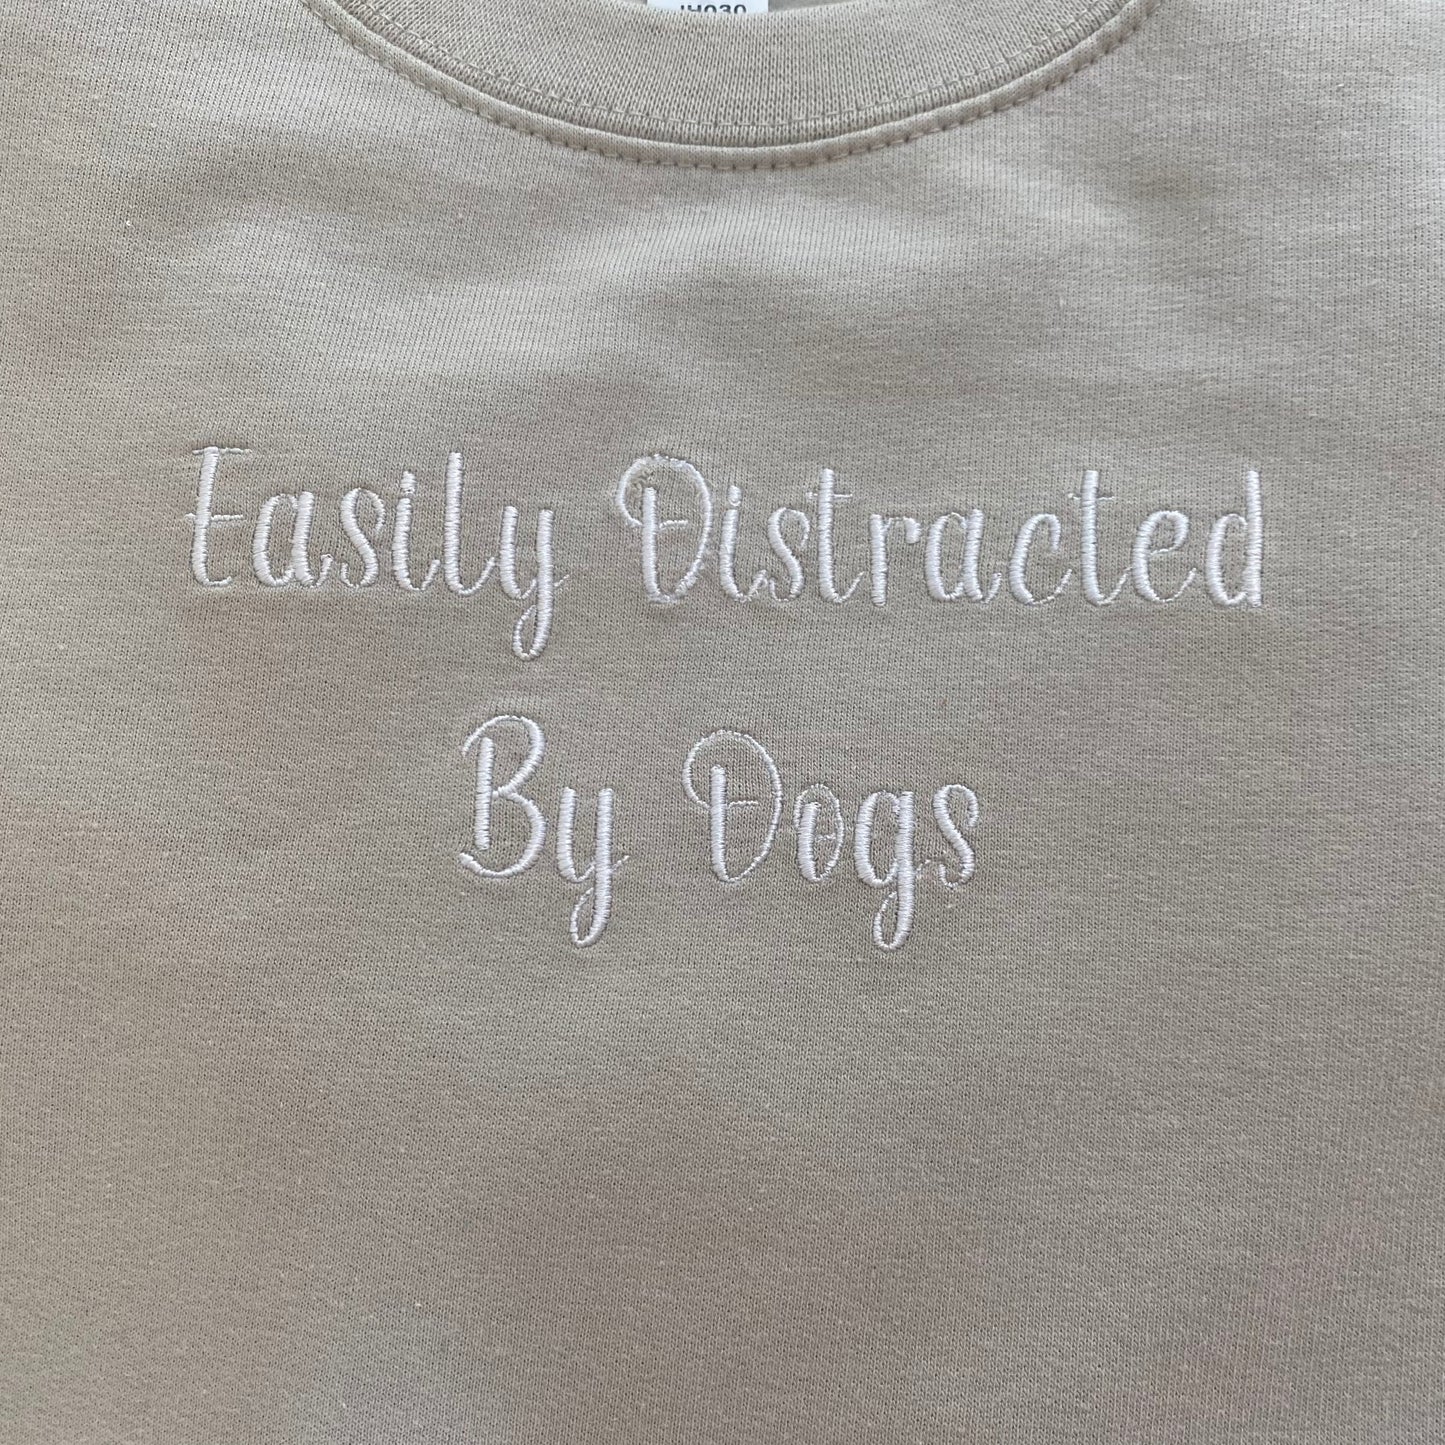 Easily Distracted By Dogs Embroidered Unisex Adults Sweatshirt